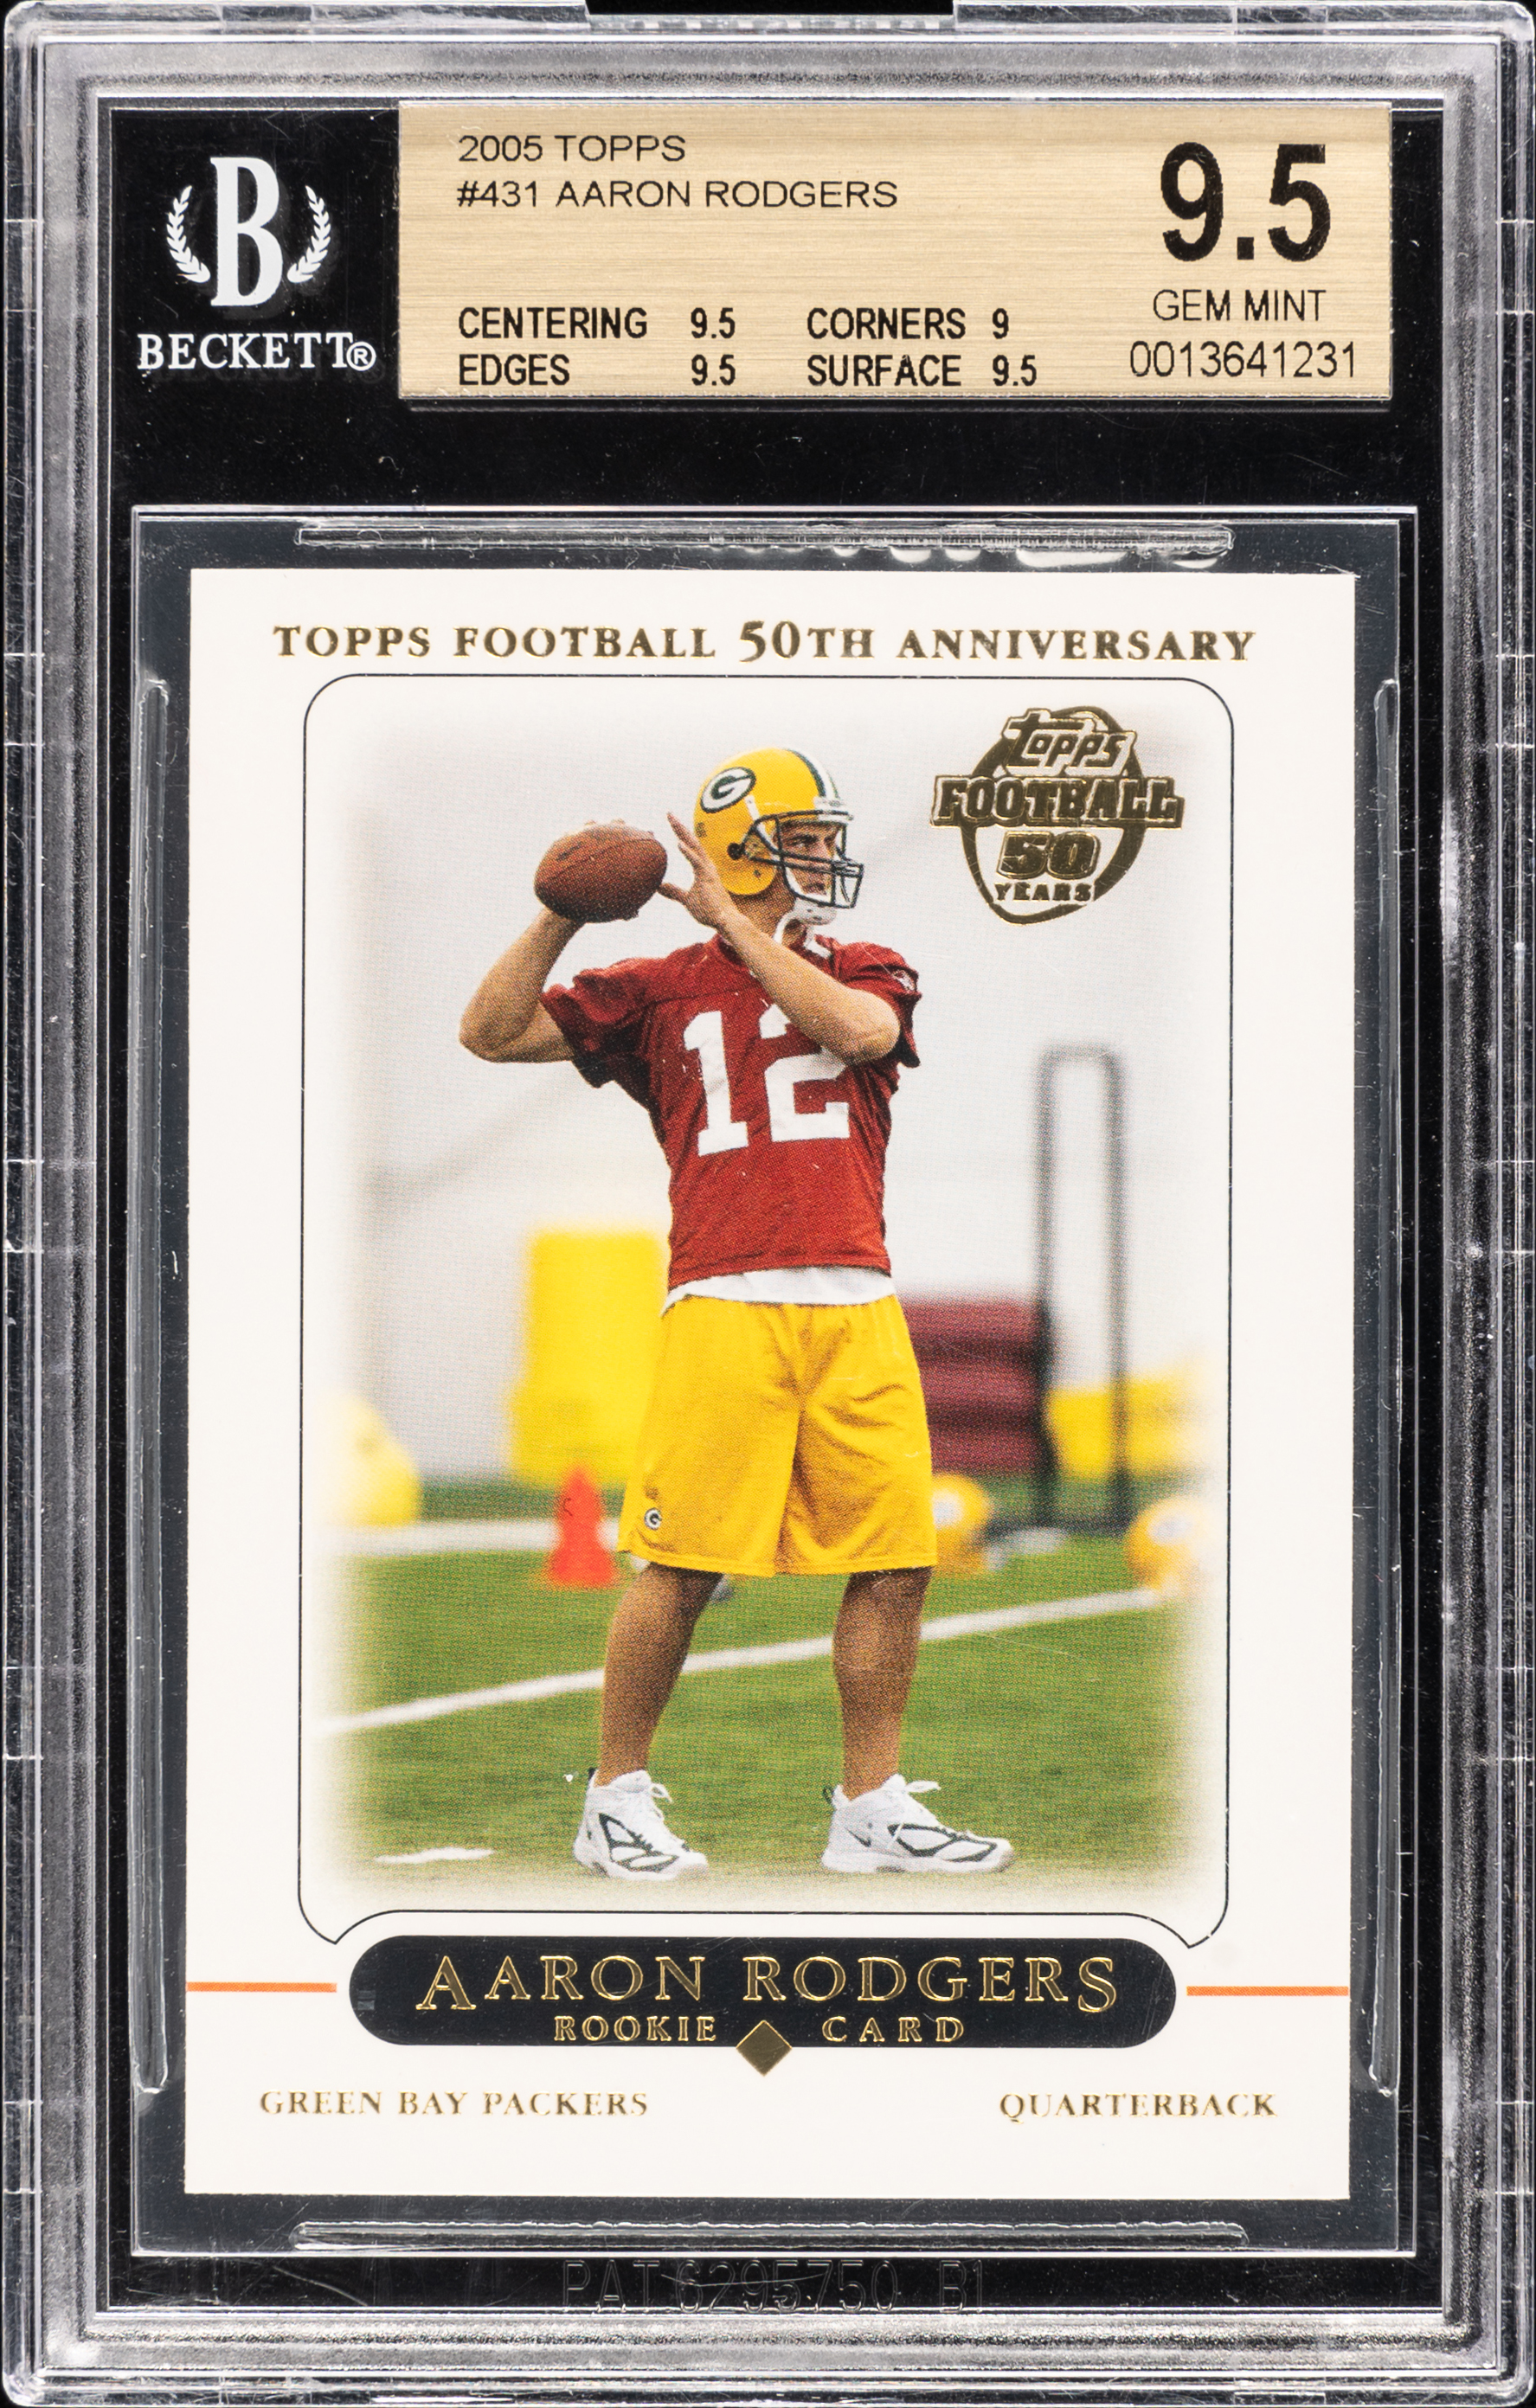 2005 Topps #431 Aaron Rodgers Rookie Card – BGS GEM MINT 9.5